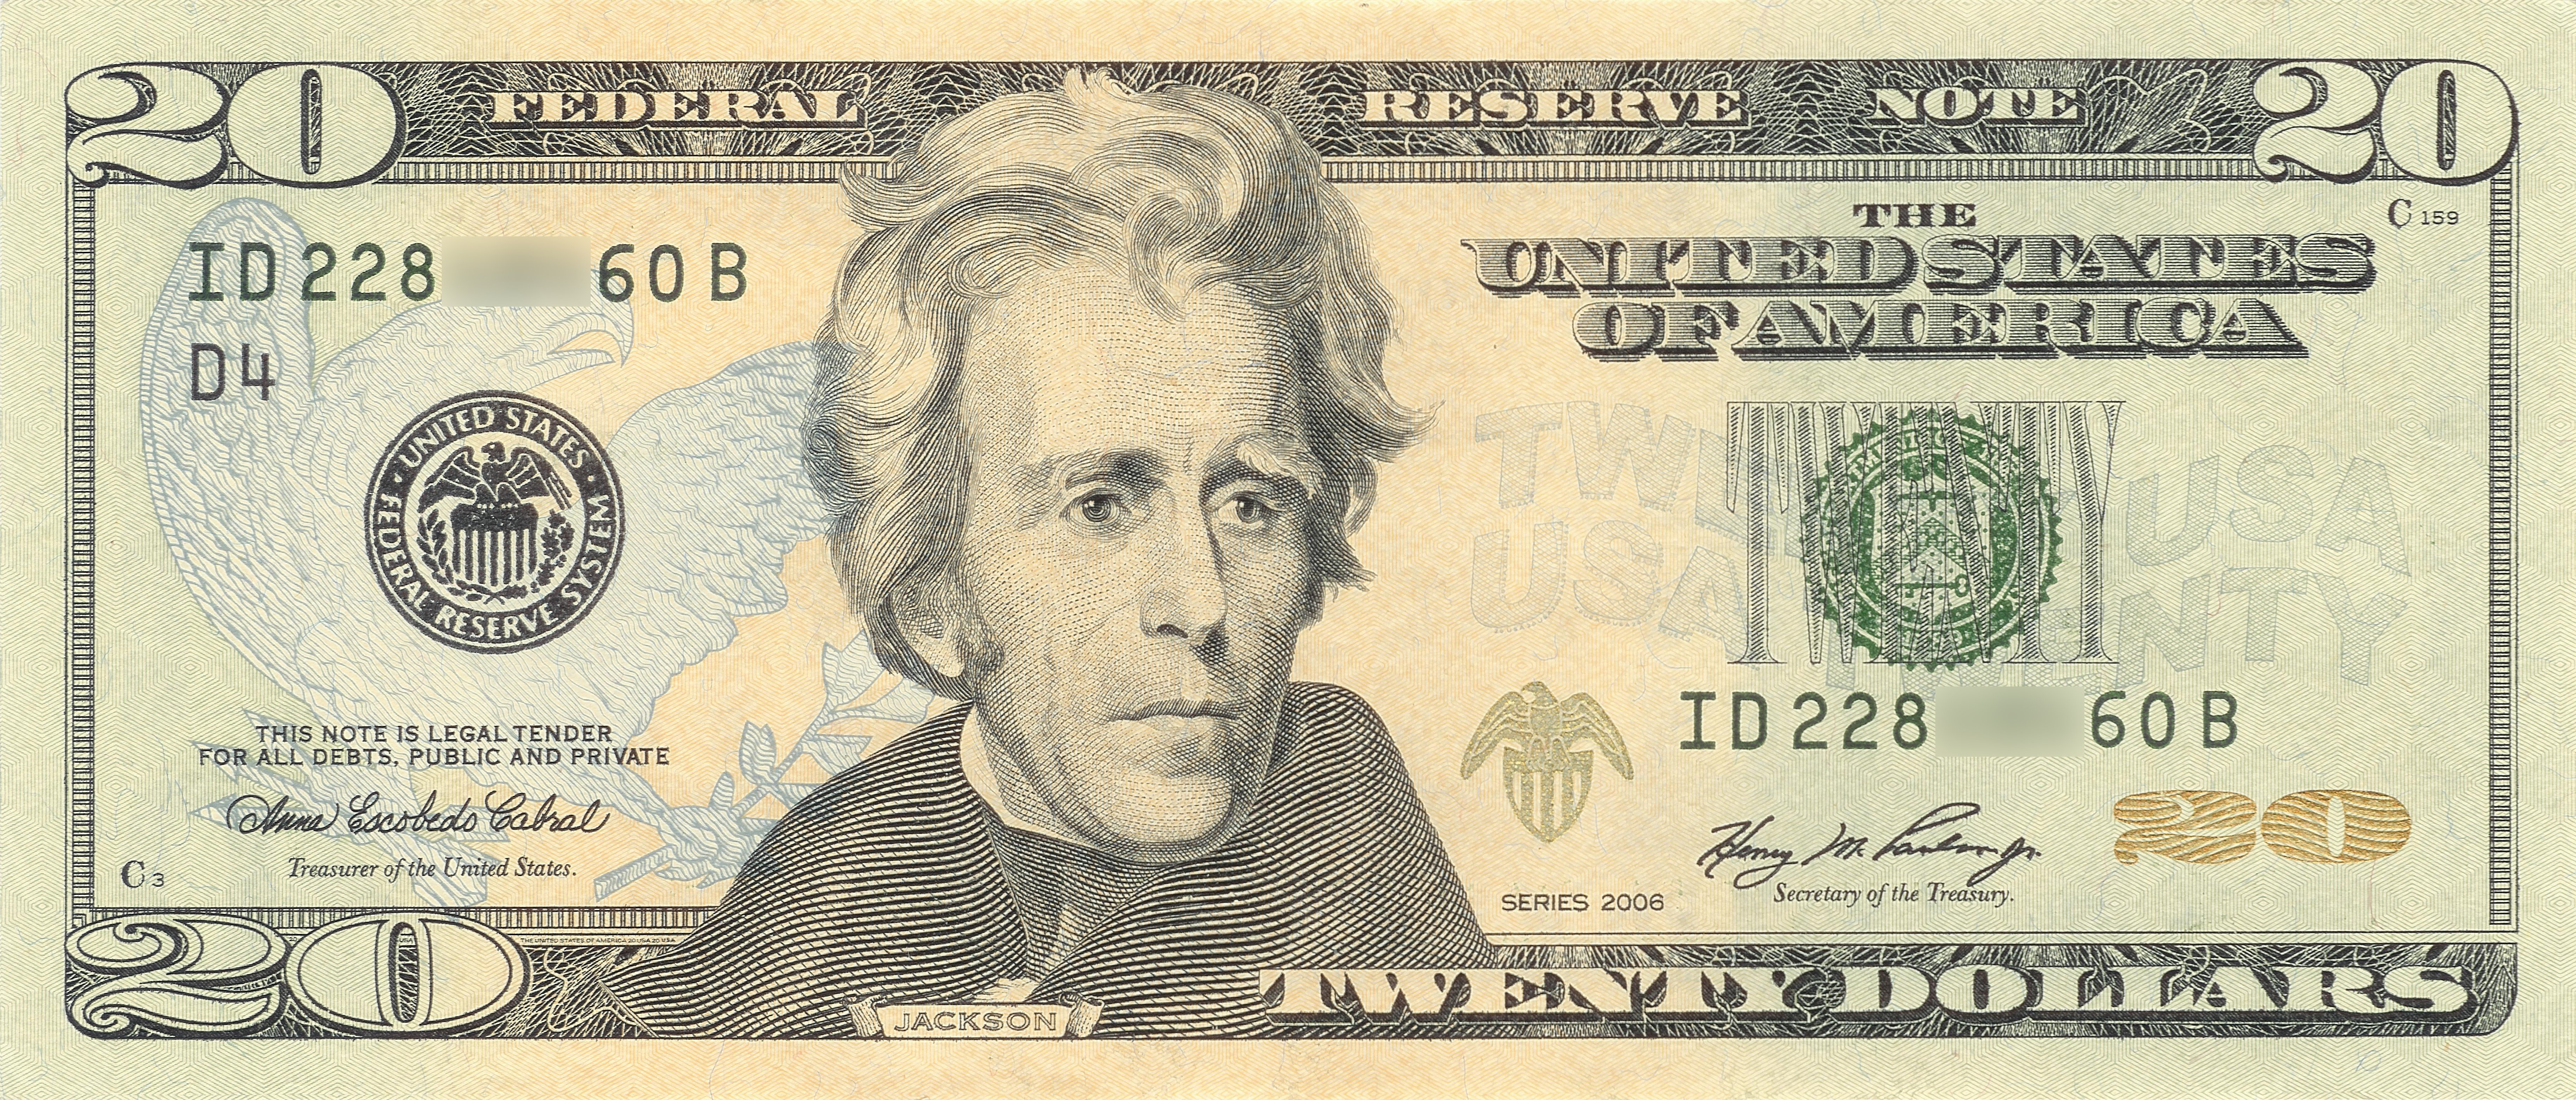 Obverse of the Series 2006 $20 bill